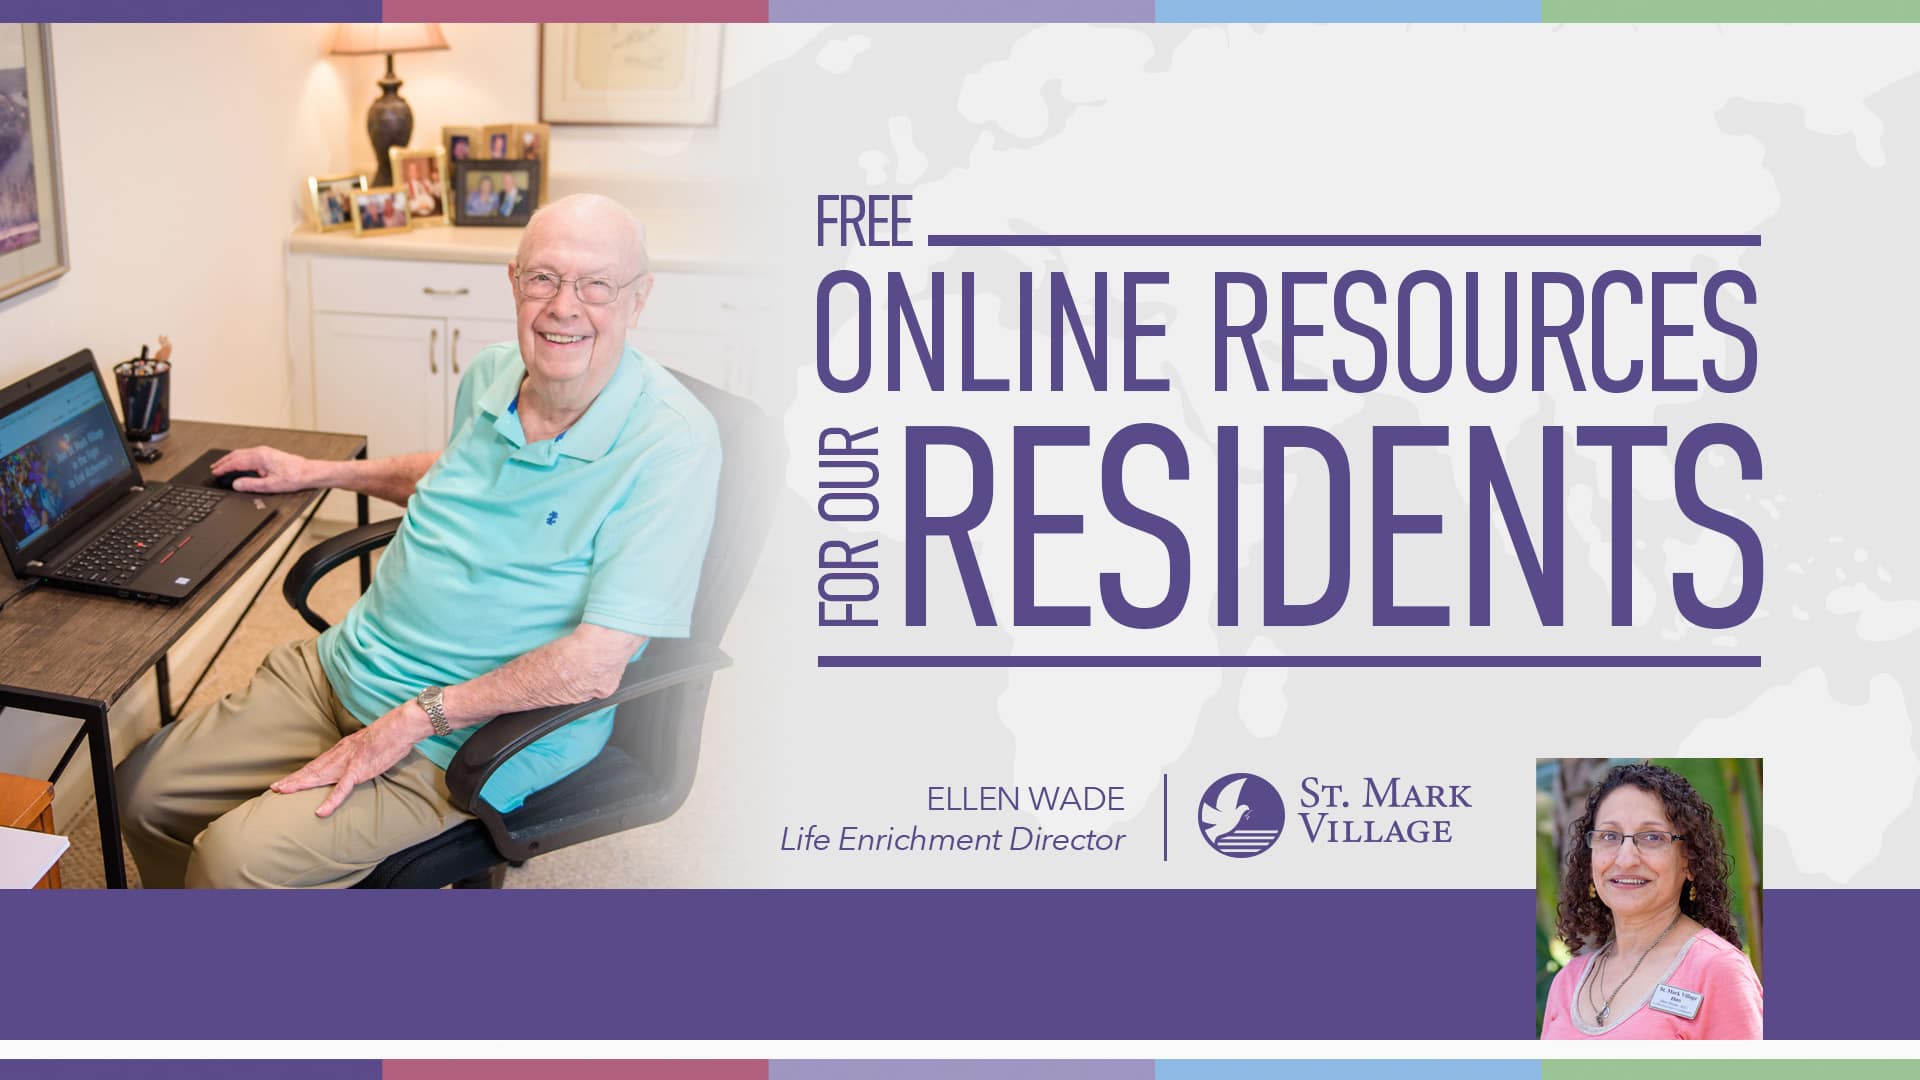 Free online resources for residents.